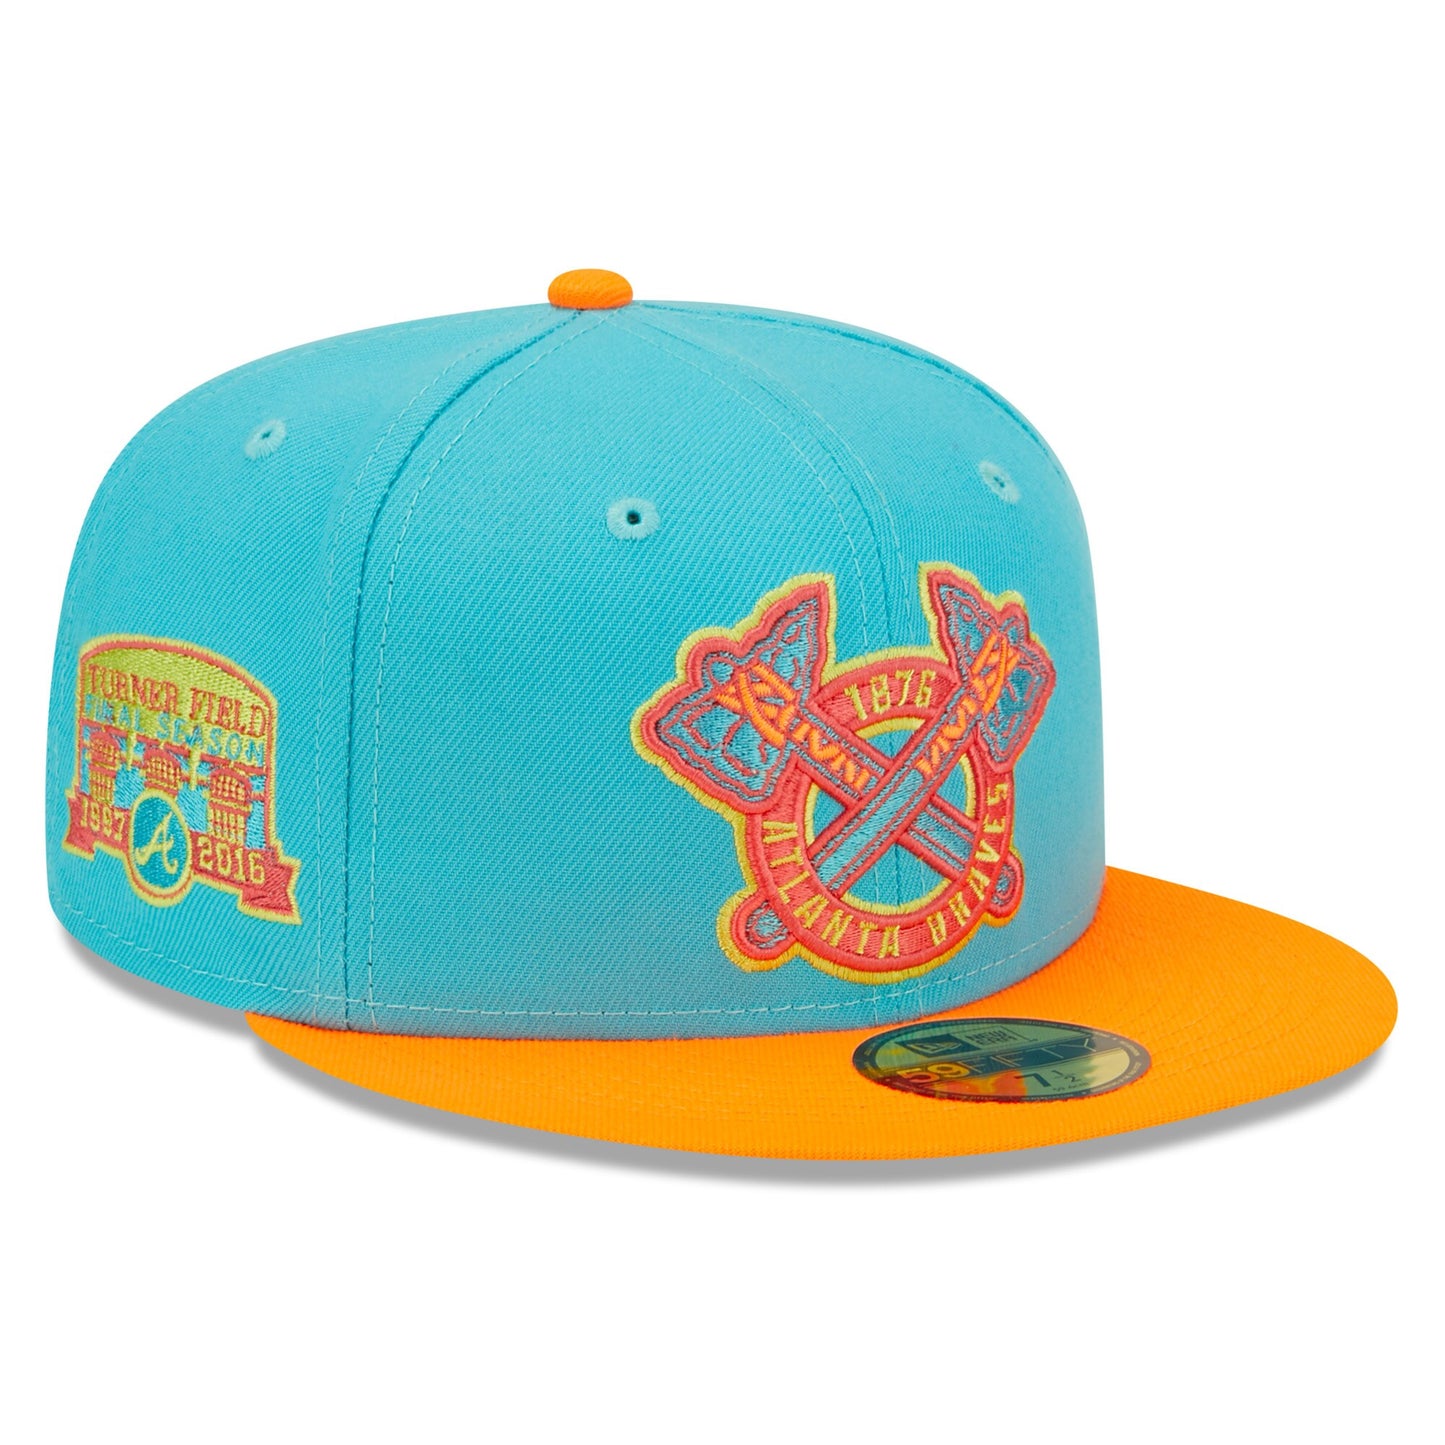 Atlanta Braves New Era Vice Highlighter 59FIFTY Fitted Hat - Blue/Orange